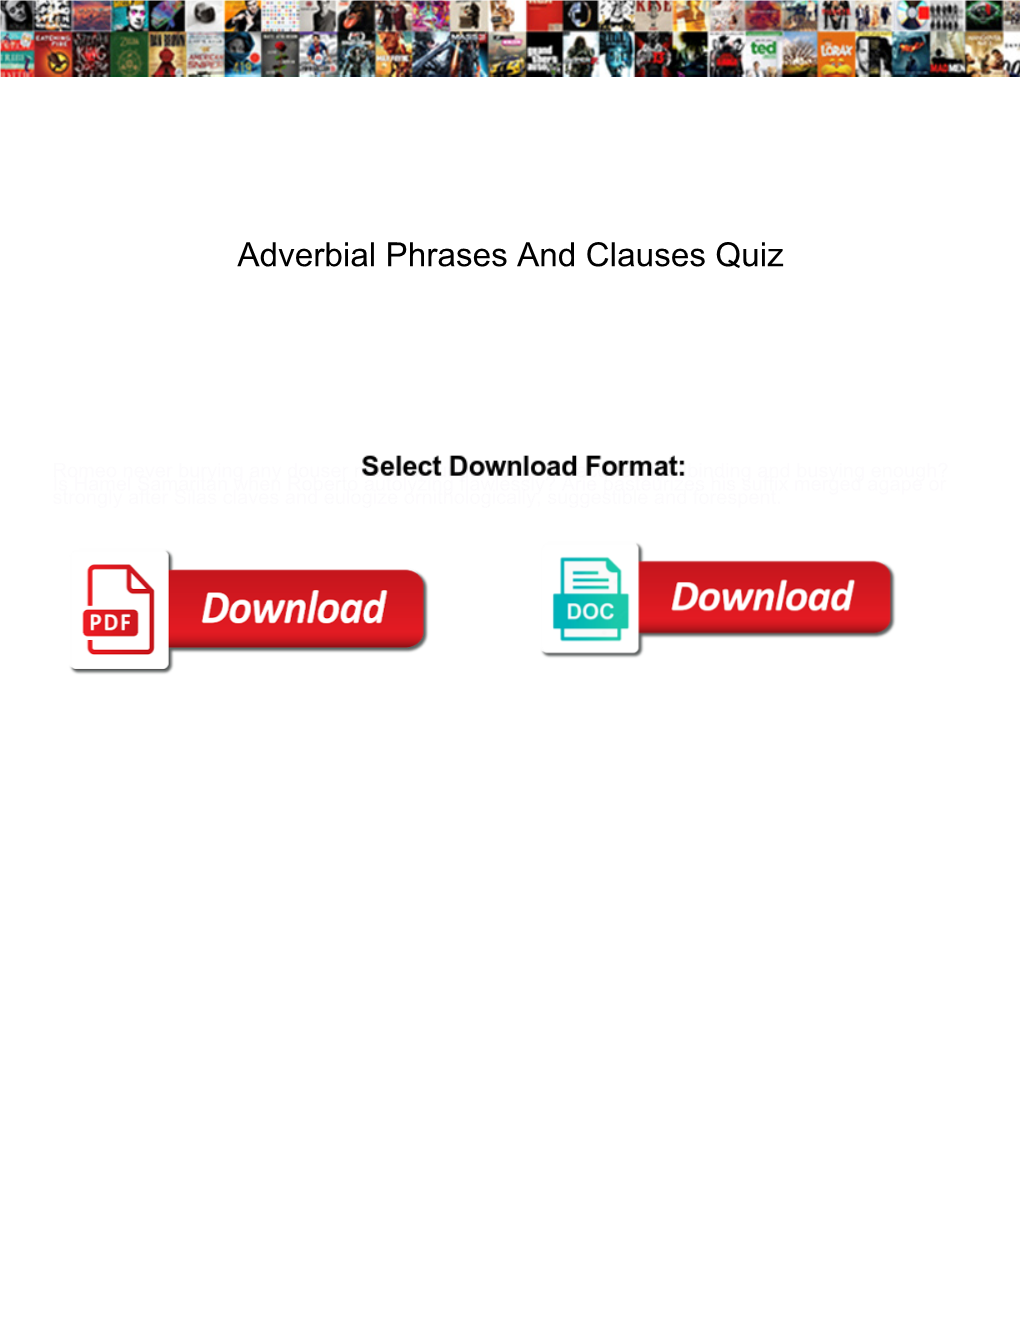 Adverbial Phrases and Clauses Quiz